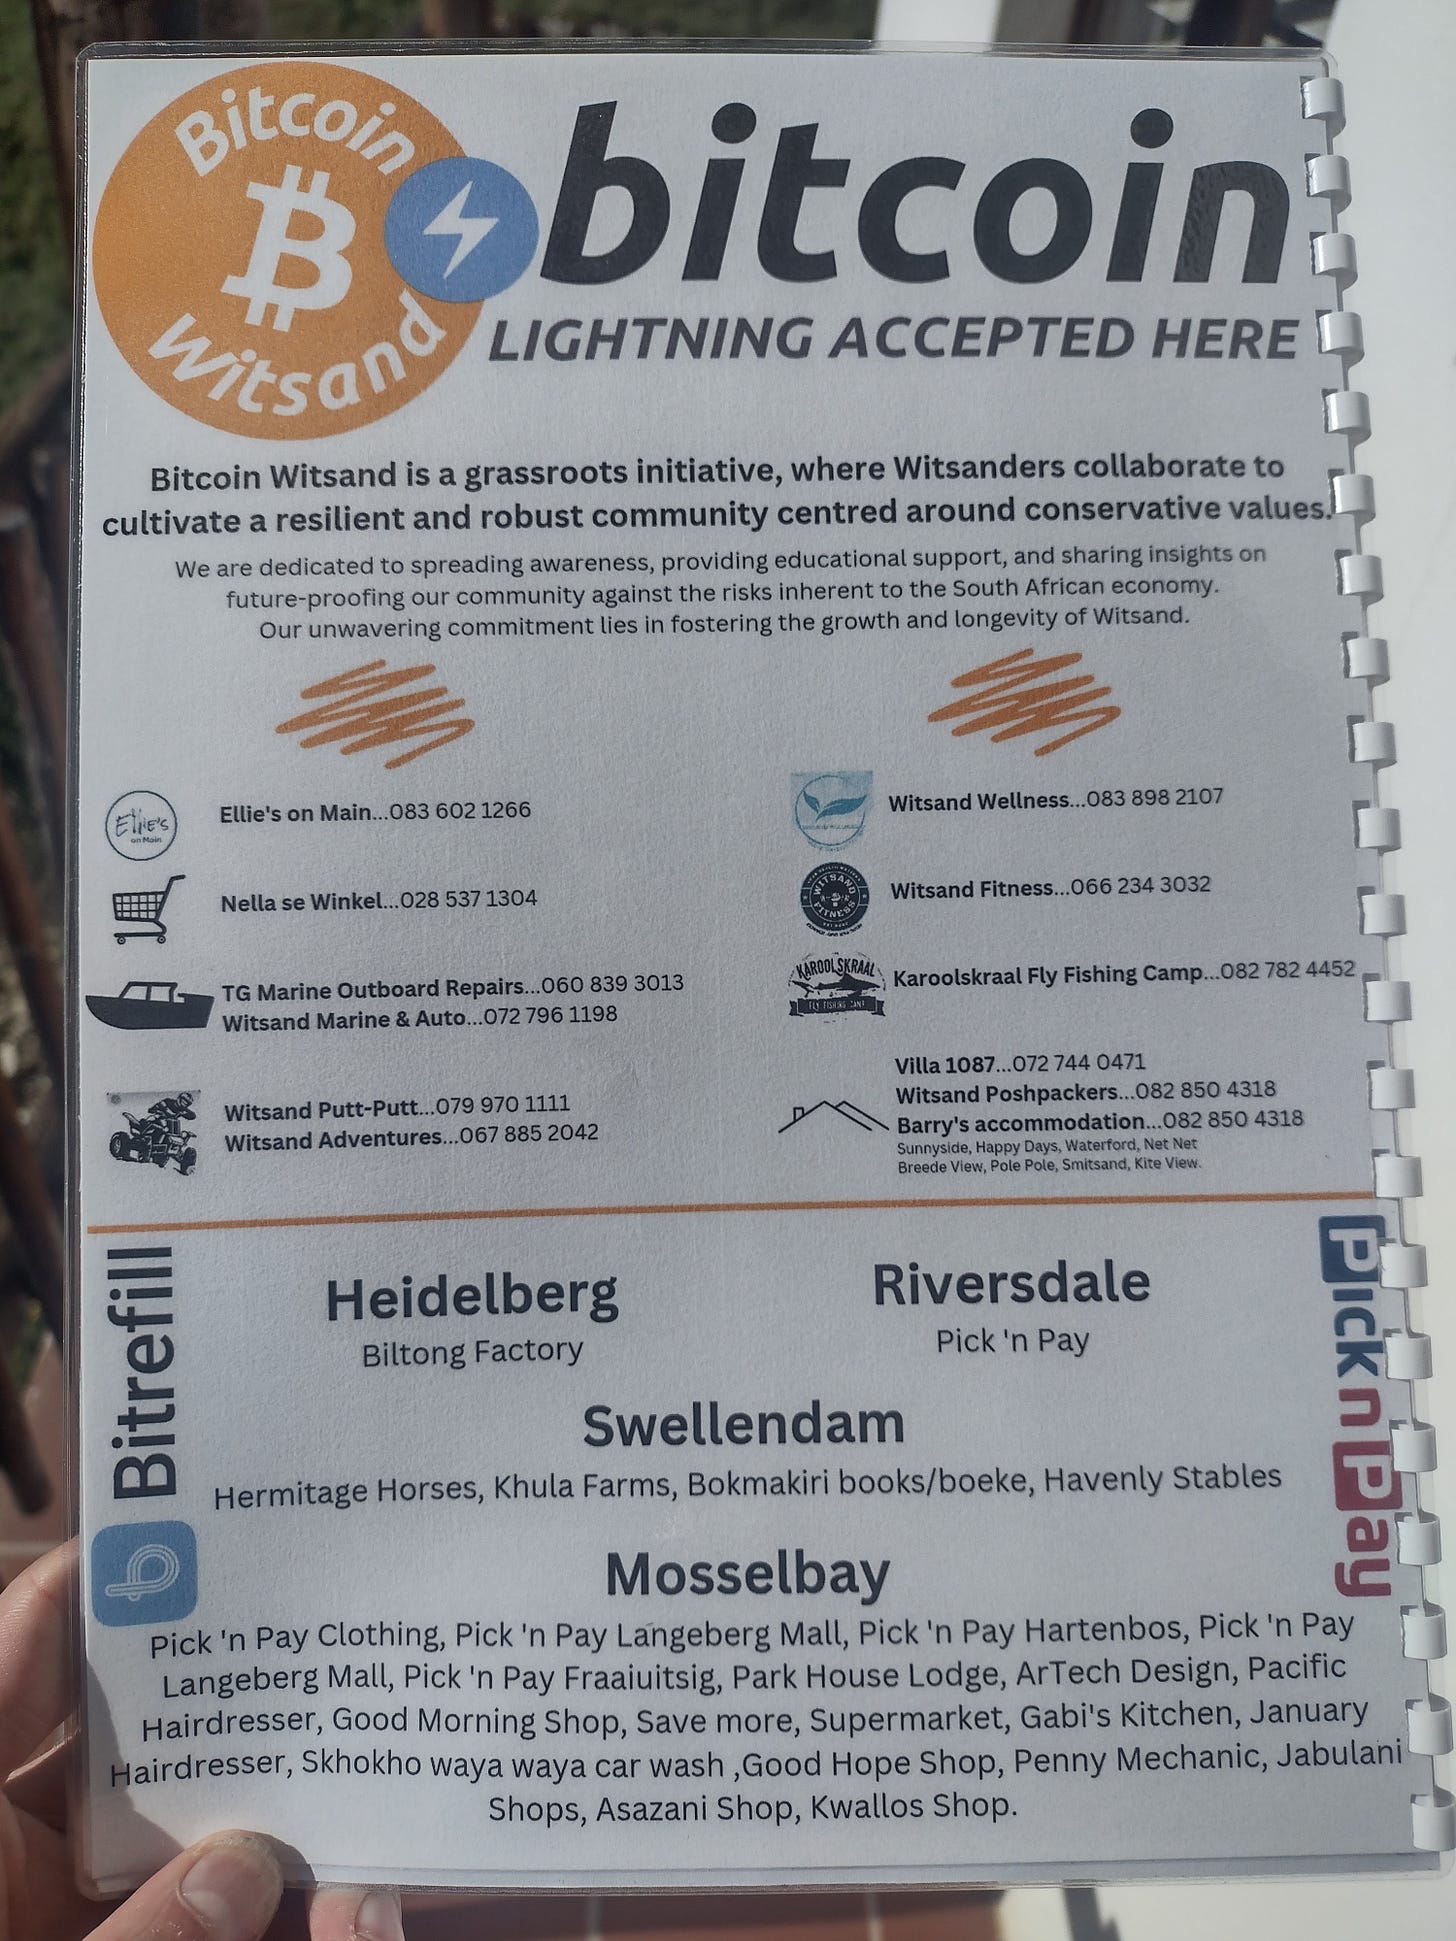 Bitcoin Witsand booklet